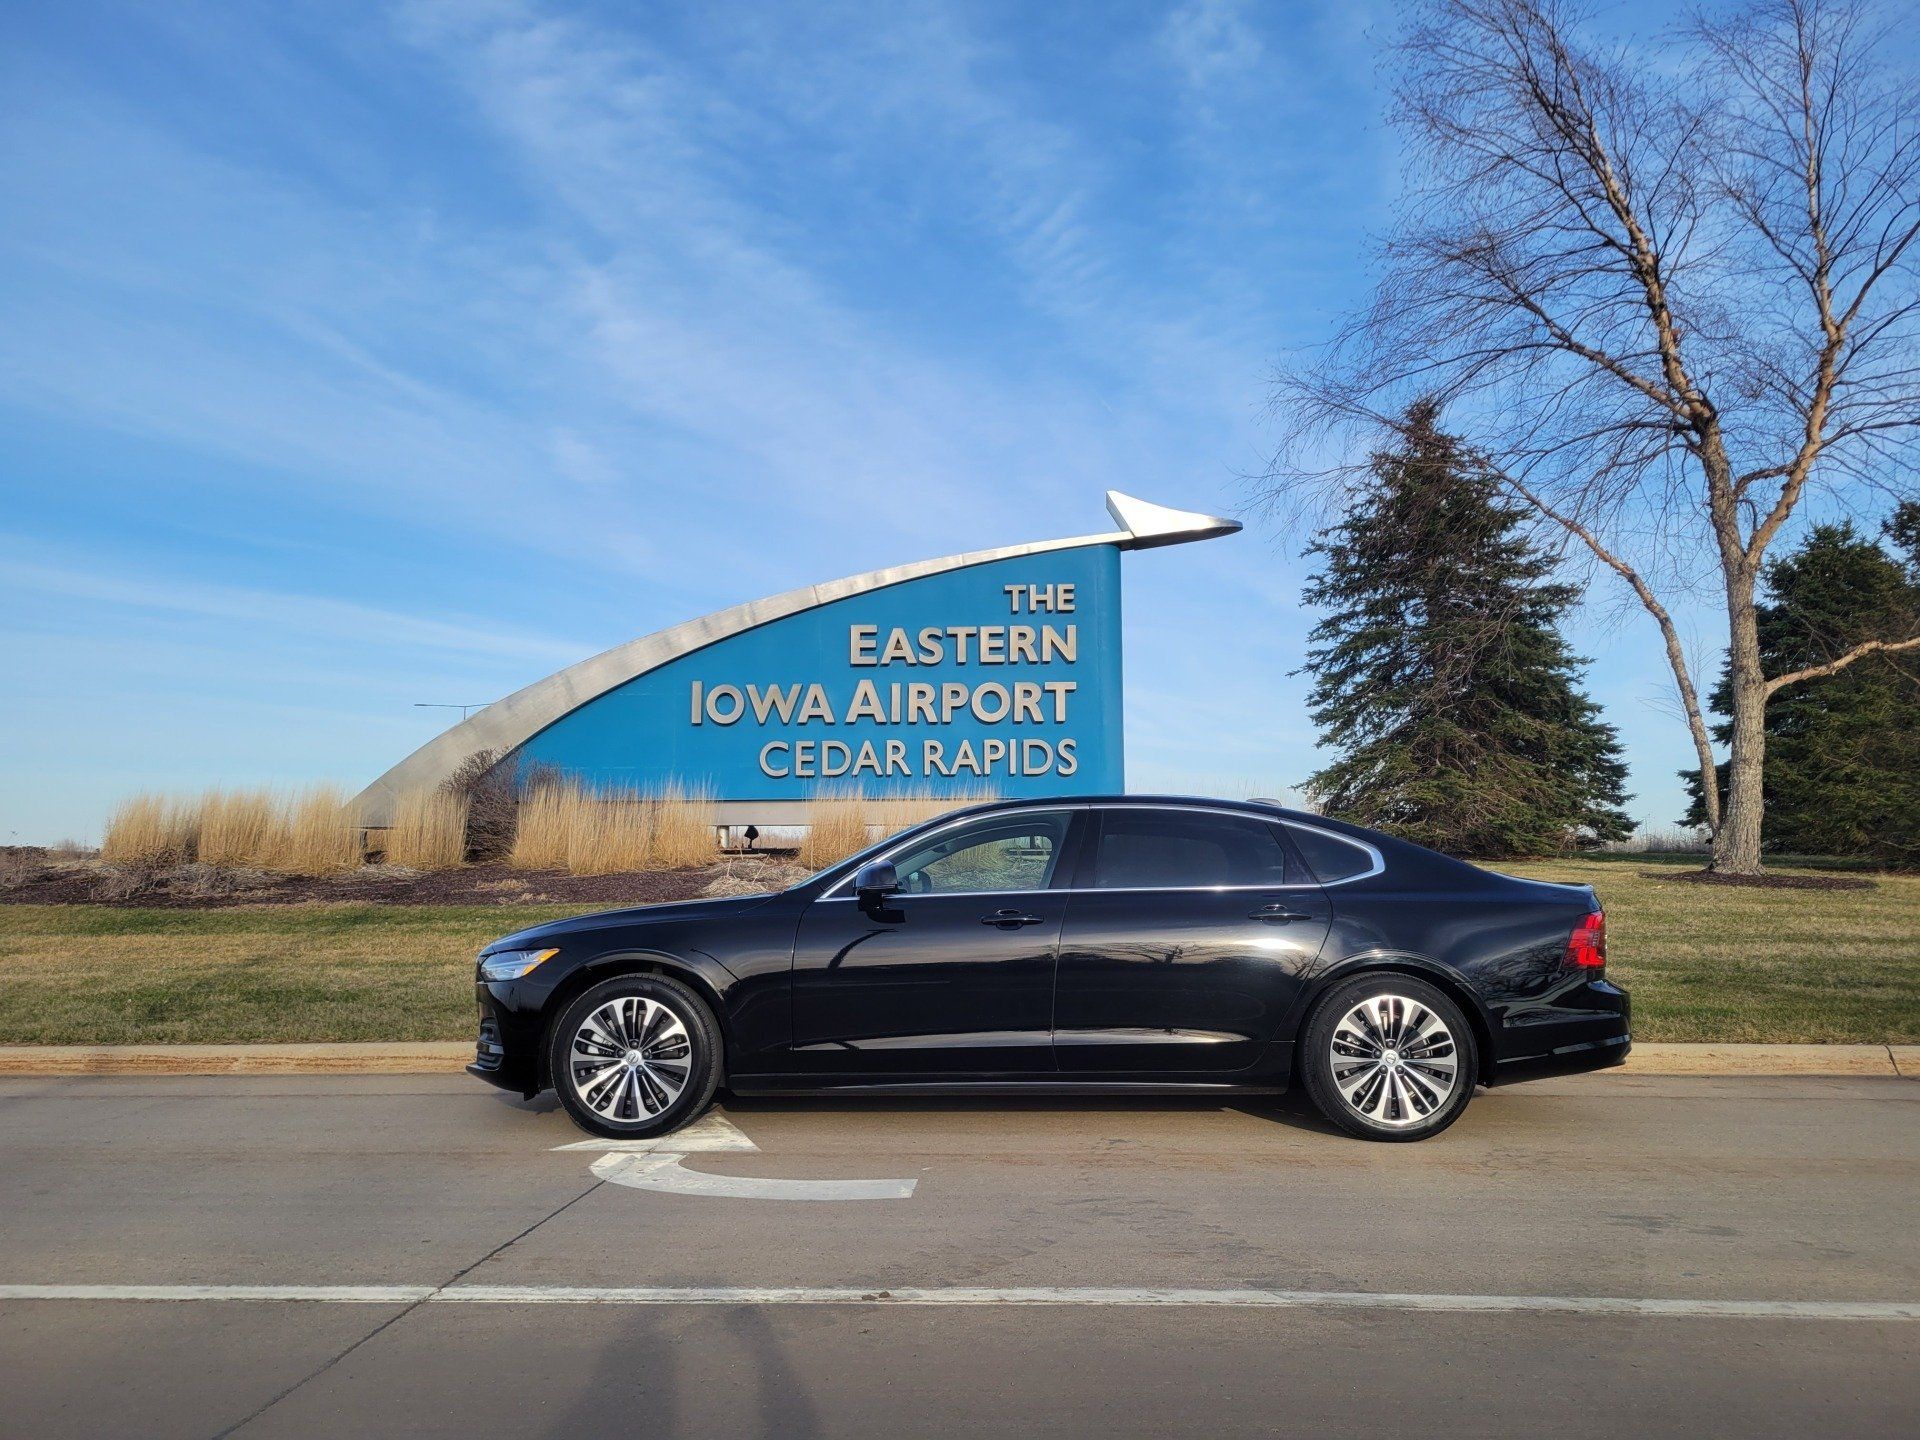 A black Volvo S90 parked in front of a sign in Iowa City